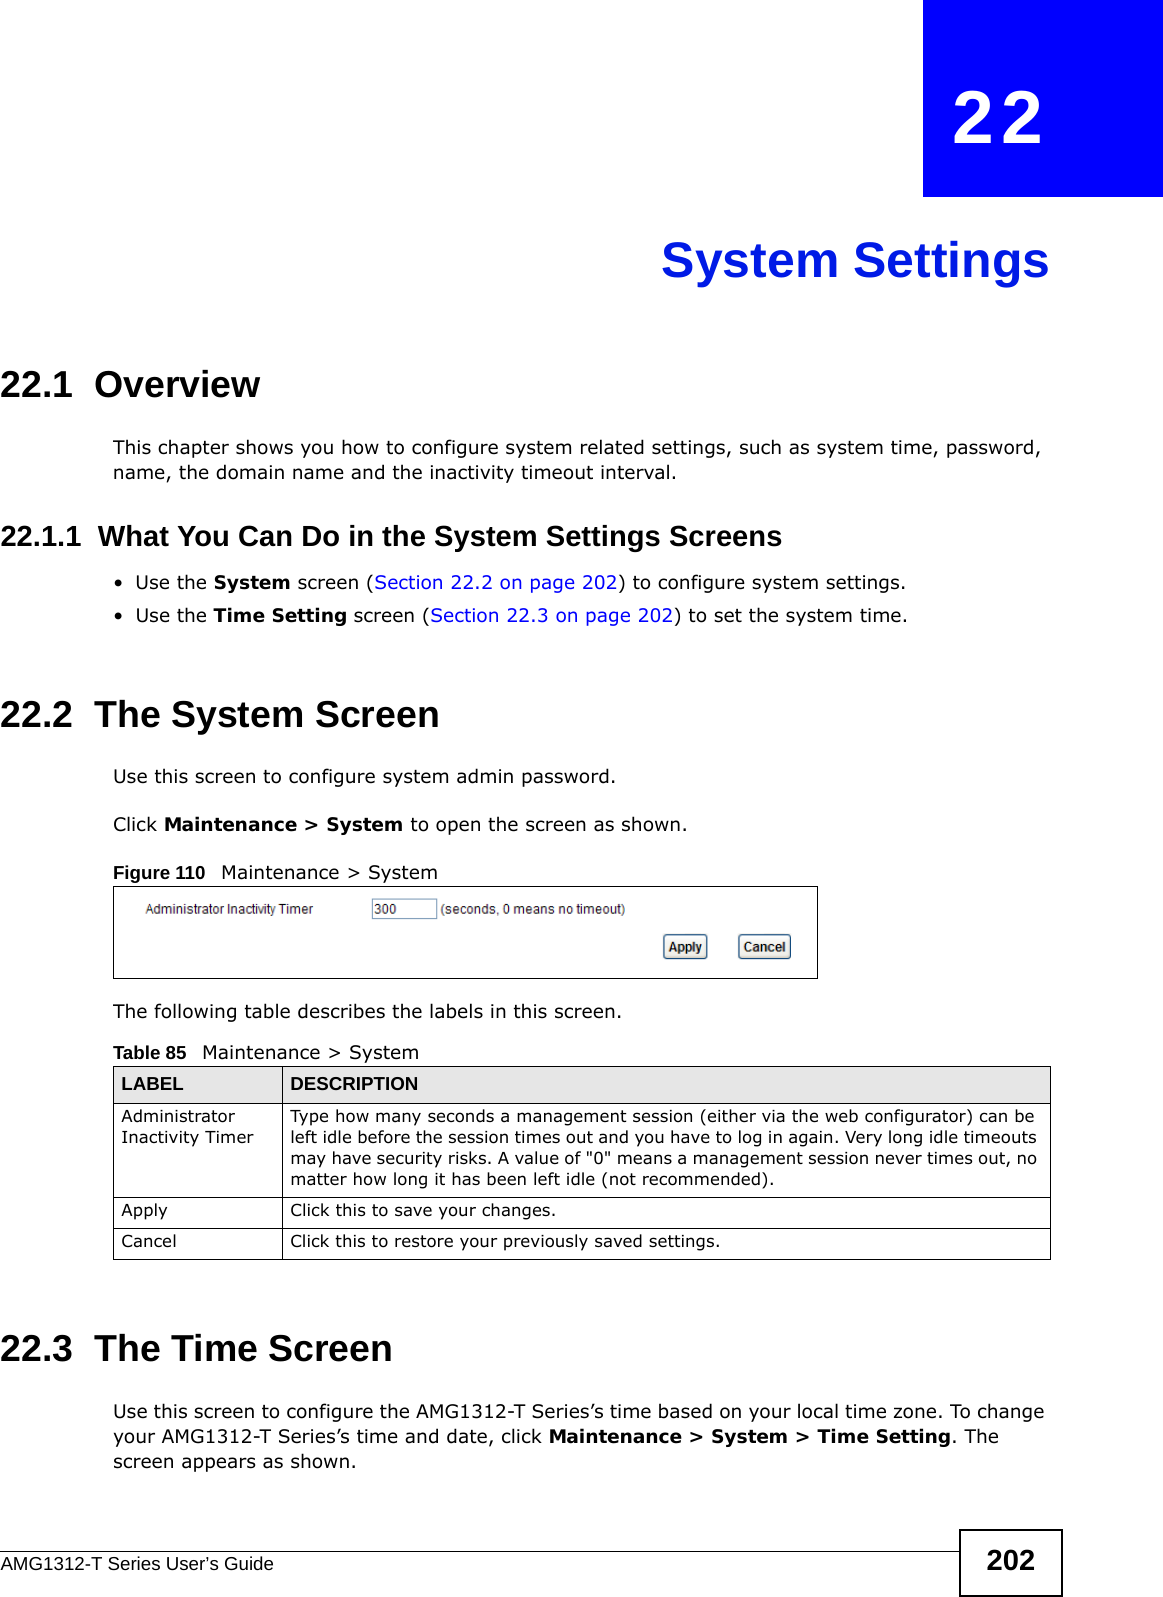 AMG1312-T Series User’s Guide 202CHAPTER   22System Settings22.1  OverviewThis chapter shows you how to configure system related settings, such as system time, password, name, the domain name and the inactivity timeout interval.    22.1.1  What You Can Do in the System Settings Screens•Use the System screen (Section 22.2 on page 202) to configure system settings.•Use the Time Setting screen (Section 22.3 on page 202) to set the system time.22.2  The System ScreenUse this screen to configure system admin password.Click Maintenance &gt; System to open the screen as shown. Figure 110   Maintenance &gt; SystemThe following table describes the labels in this screen. 22.3  The Time Screen Use this screen to configure the AMG1312-T Series’s time based on your local time zone. To change your AMG1312-T Series’s time and date, click Maintenance &gt; System &gt; Time Setting. The screen appears as shown.Table 85   Maintenance &gt; SystemLABEL DESCRIPTIONAdministrator Inactivity TimerType how many seconds a management session (either via the web configurator) can be left idle before the session times out and you have to log in again. Very long idle timeouts may have security risks. A value of &quot;0&quot; means a management session never times out, no matter how long it has been left idle (not recommended).Apply Click this to save your changes.Cancel Click this to restore your previously saved settings.